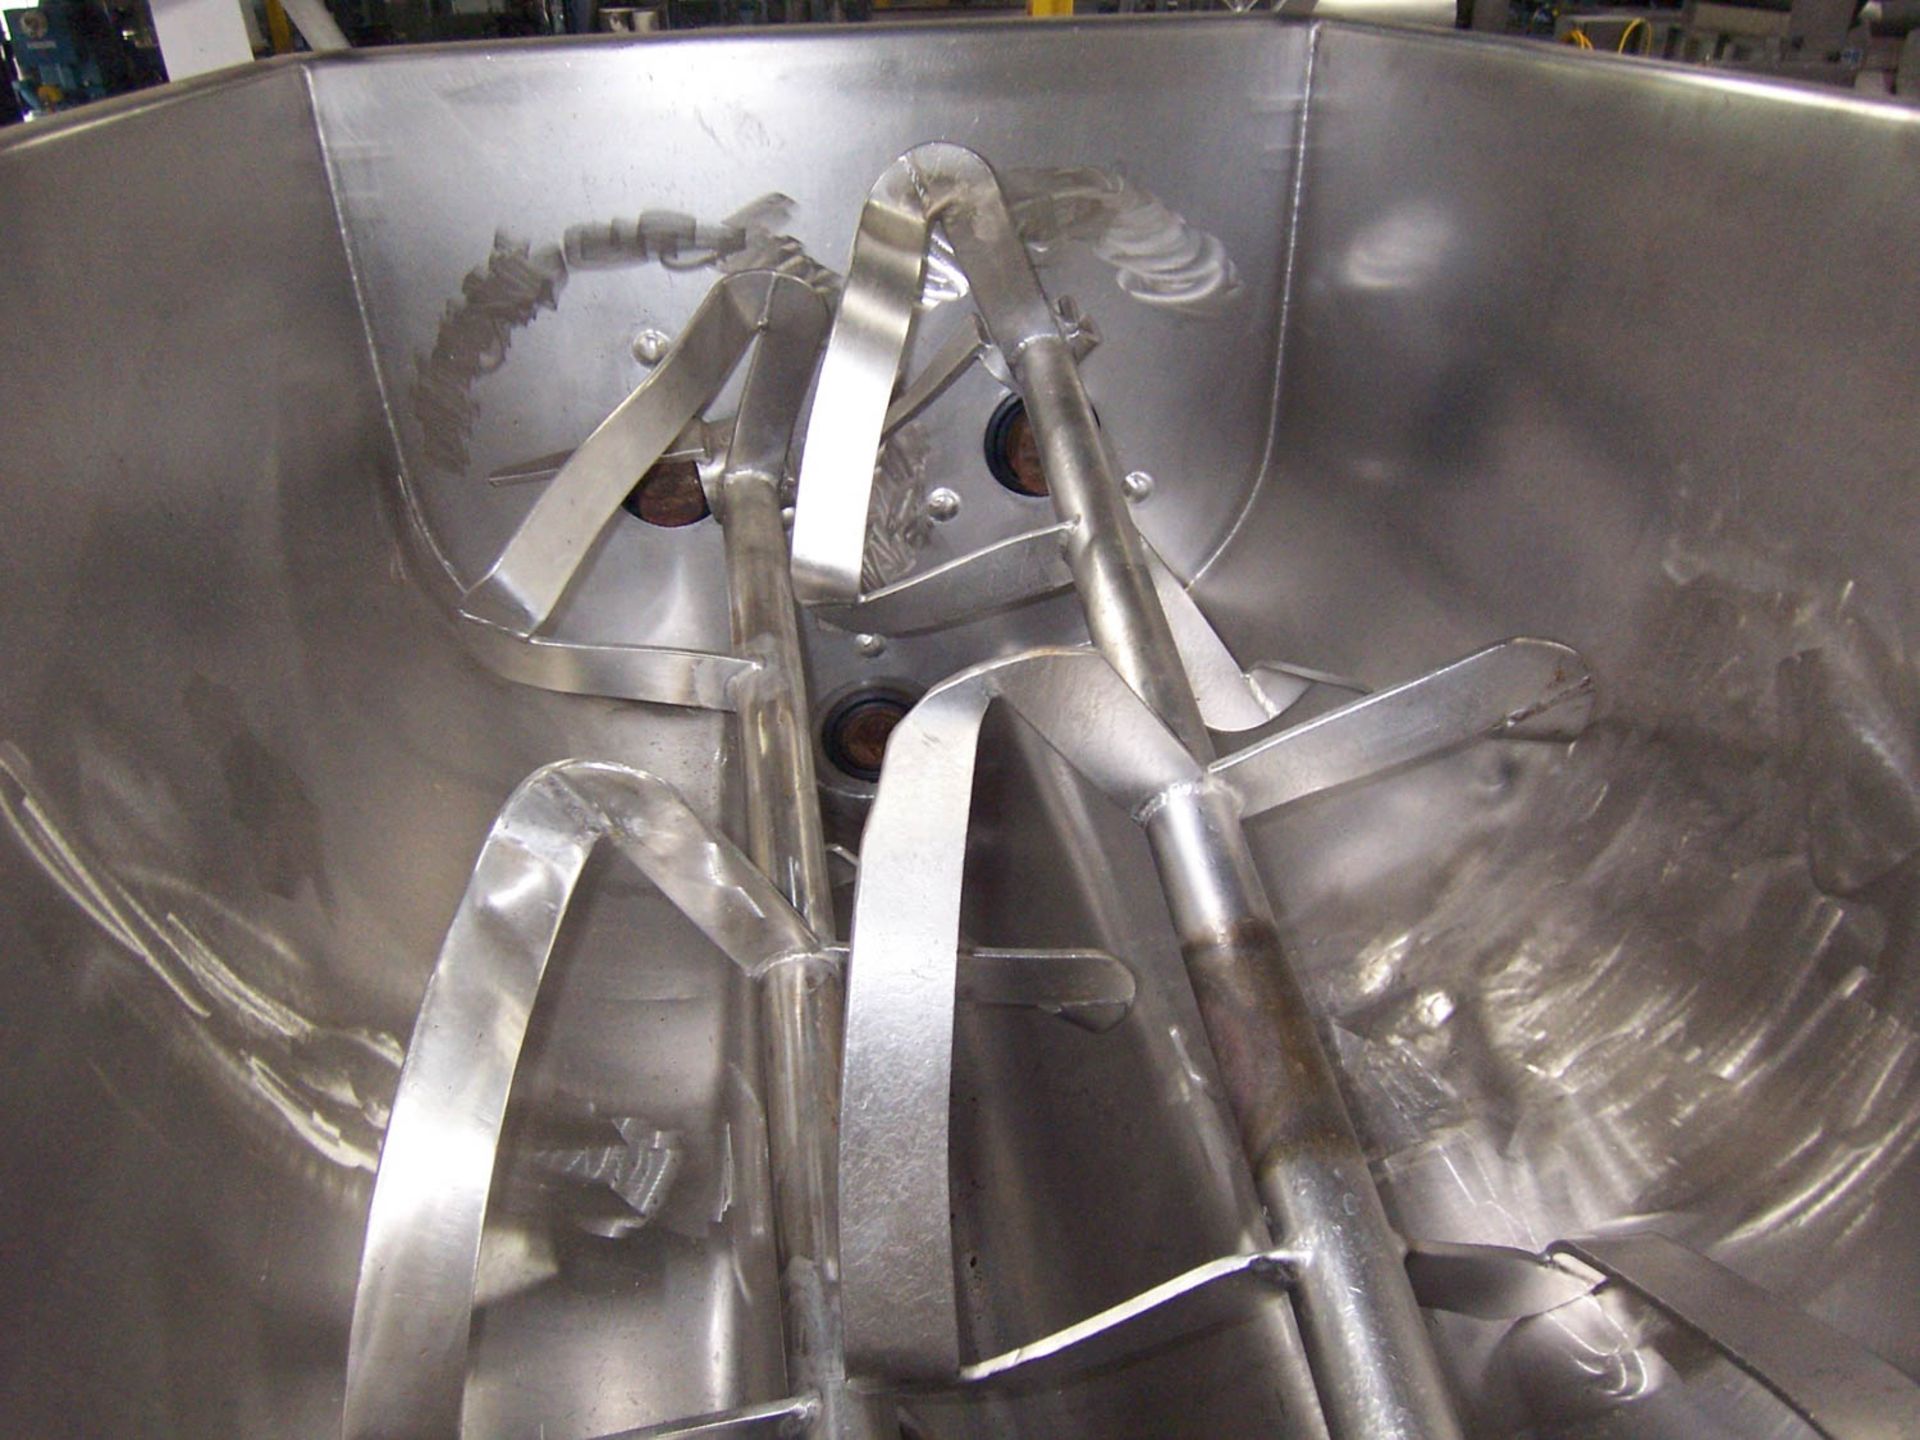 HOBART MDL. 4356-A STAINLESS STEEL DUAL SHAFT MIXER, APPROX. 20 CU FT, BOTTOM AUGER DISCHARGE, S/ - Image 3 of 3